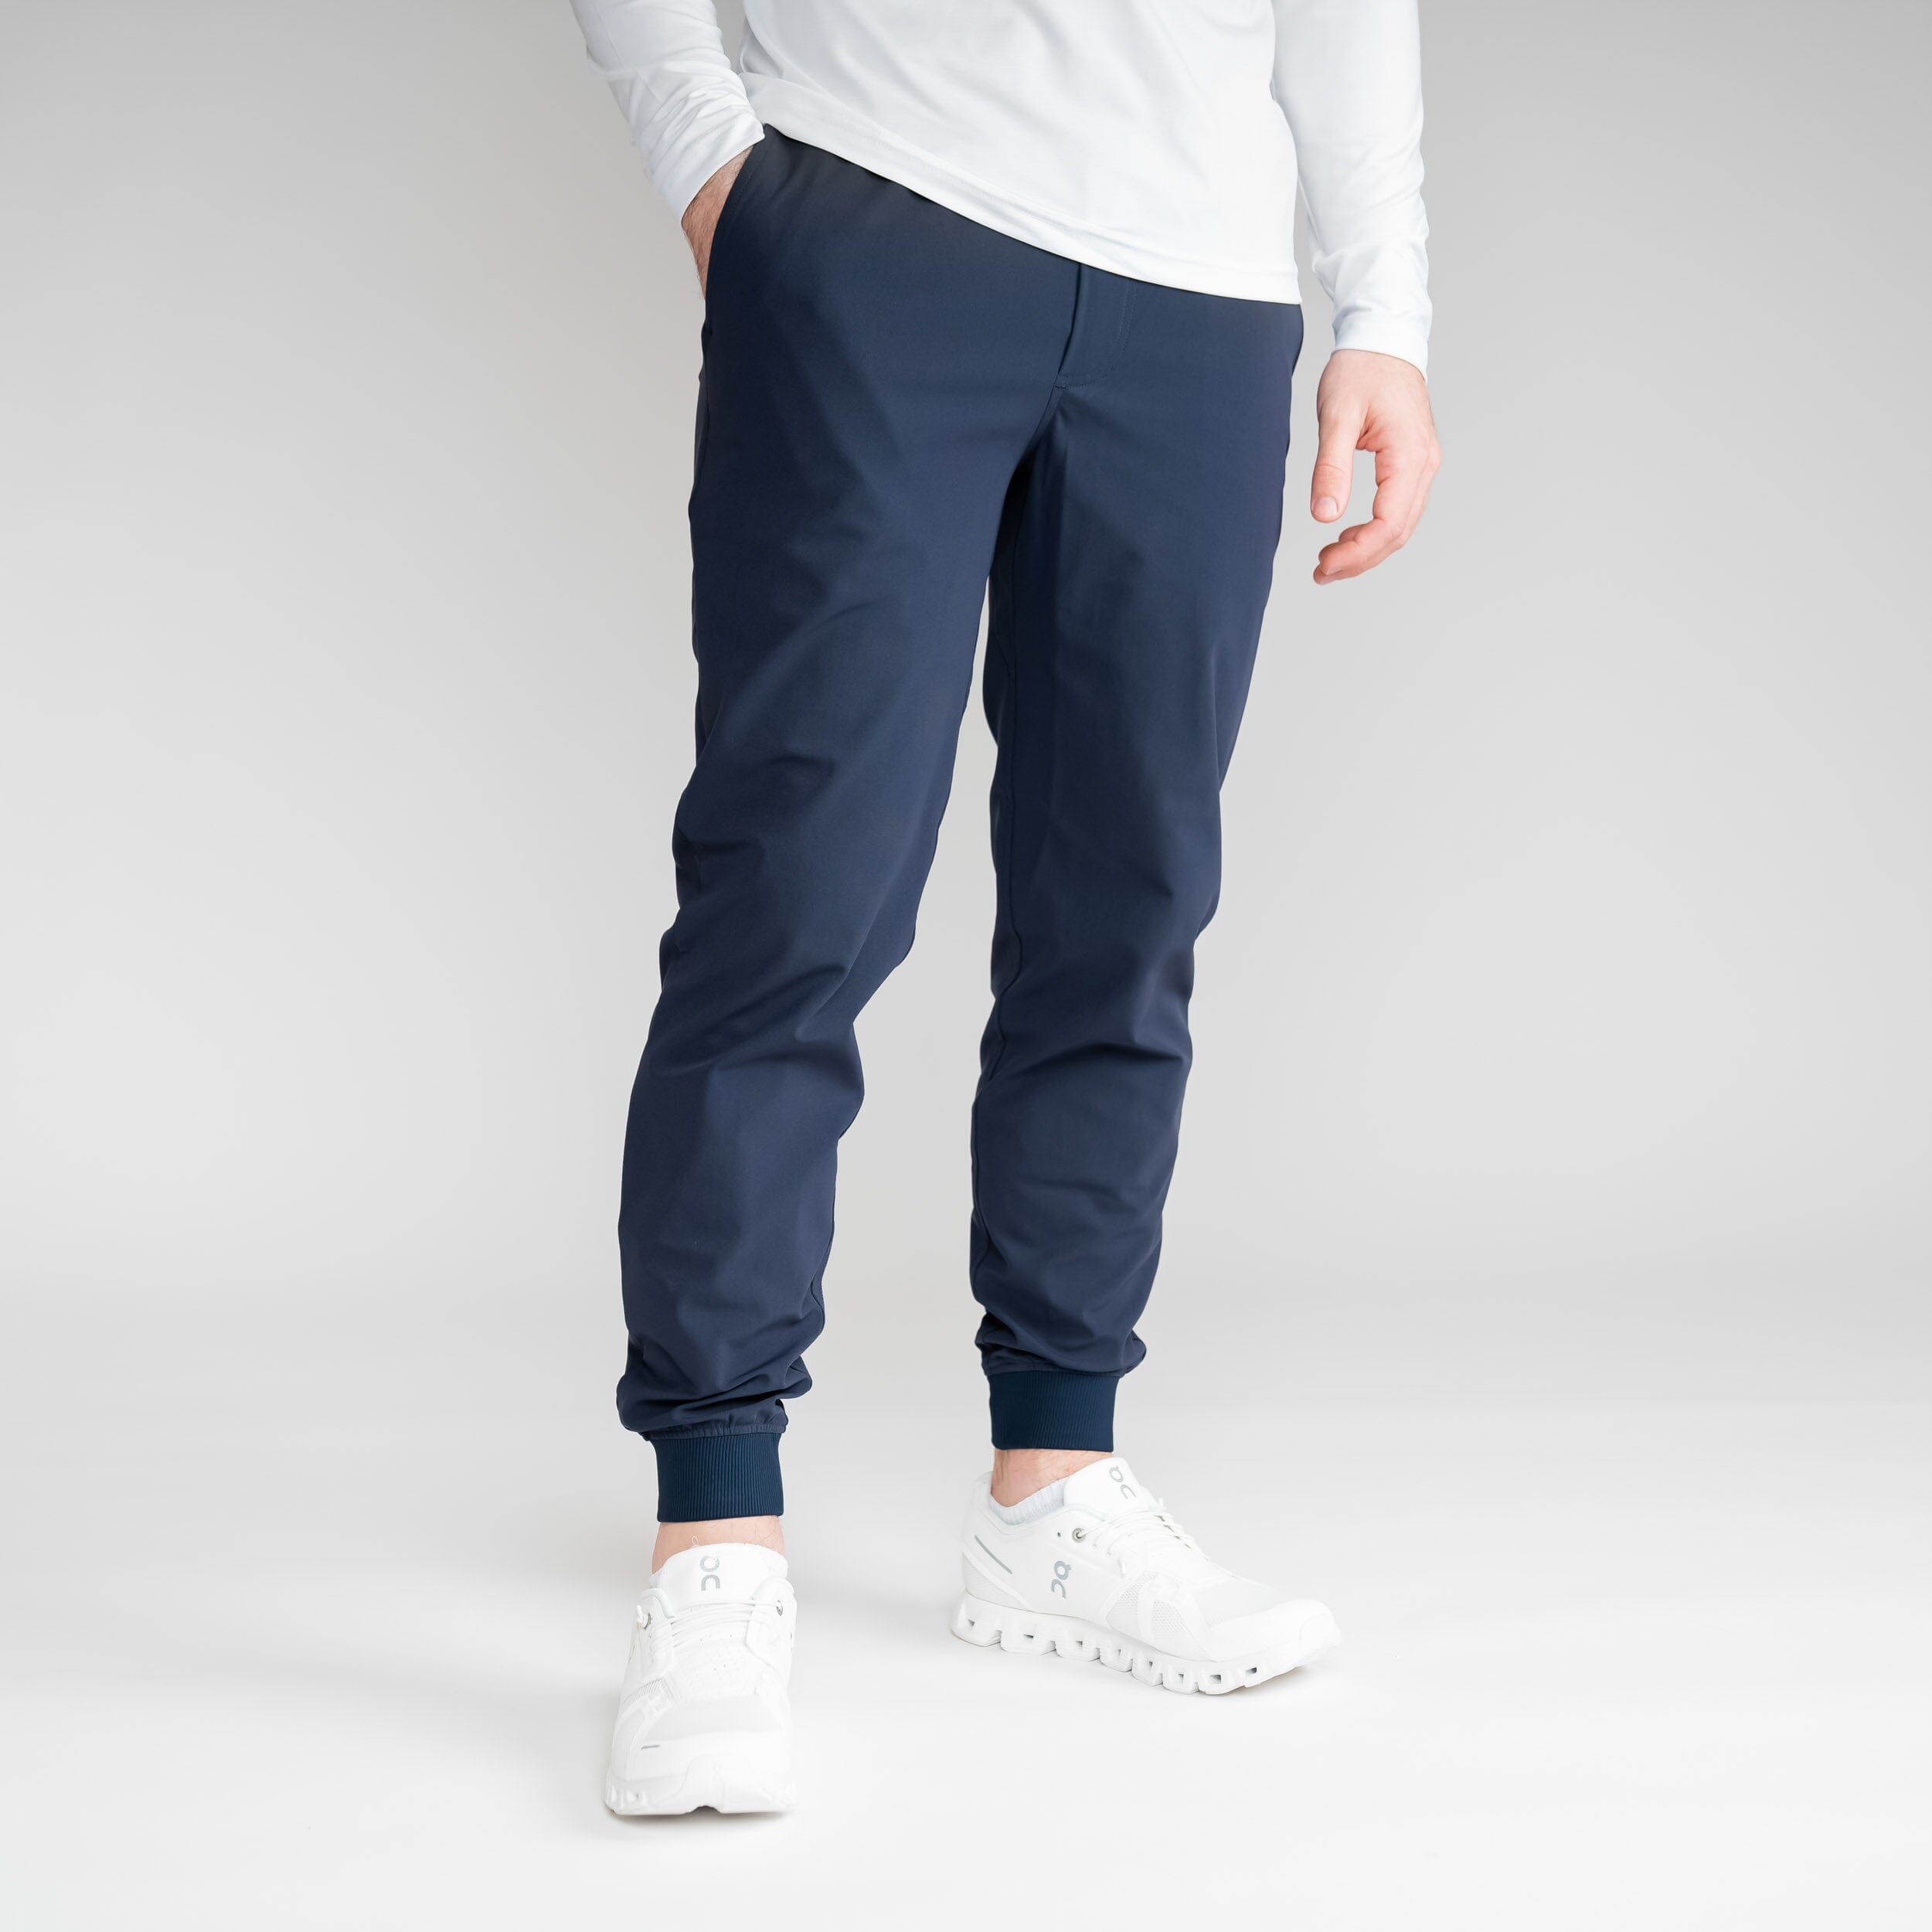 Trackpants: Check Men D.Grey::White Cotton Trackpants at Cliths